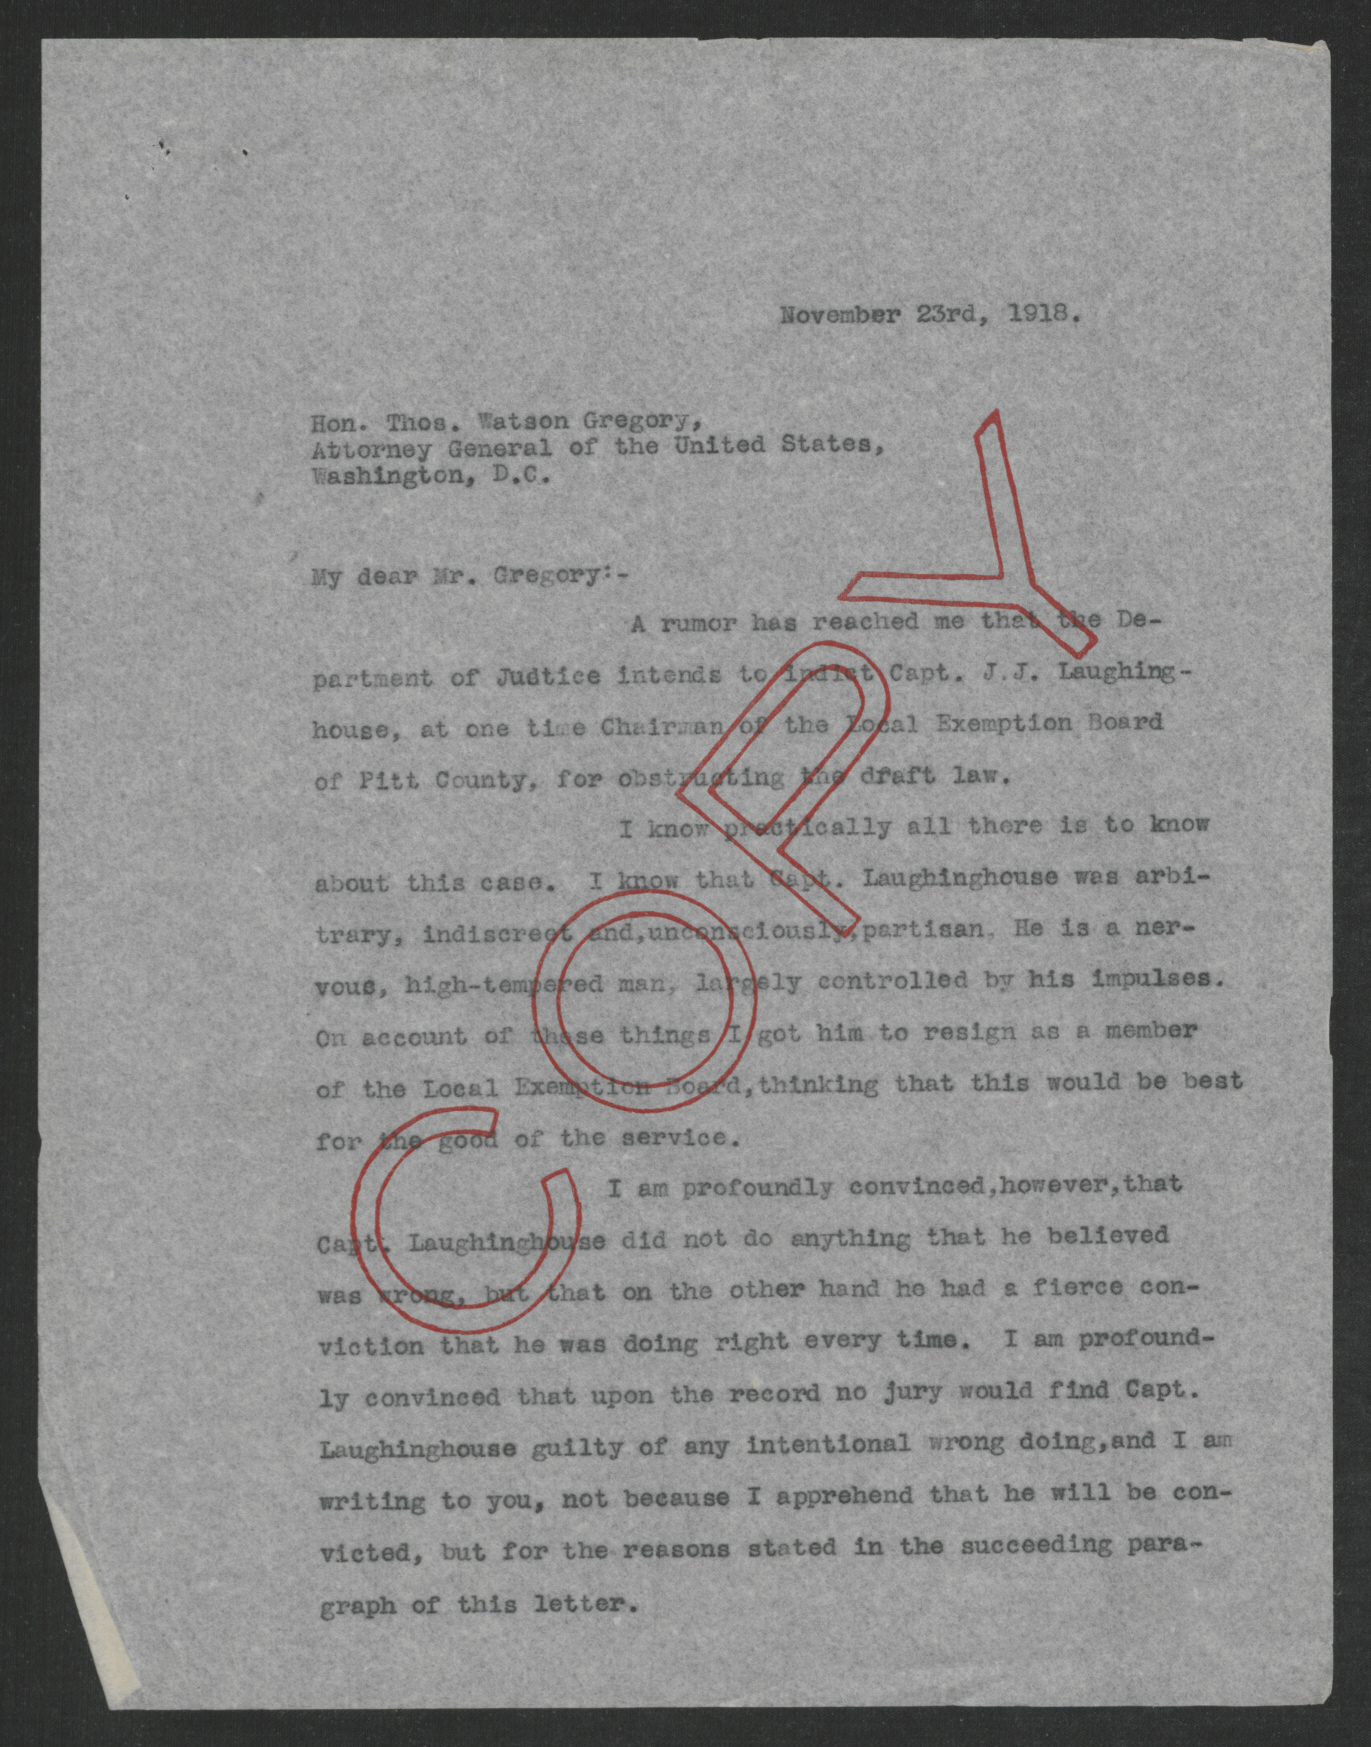 Letter from Thomas W. Bickett to Thomas W. Gregory, November 23, 1918, page 1